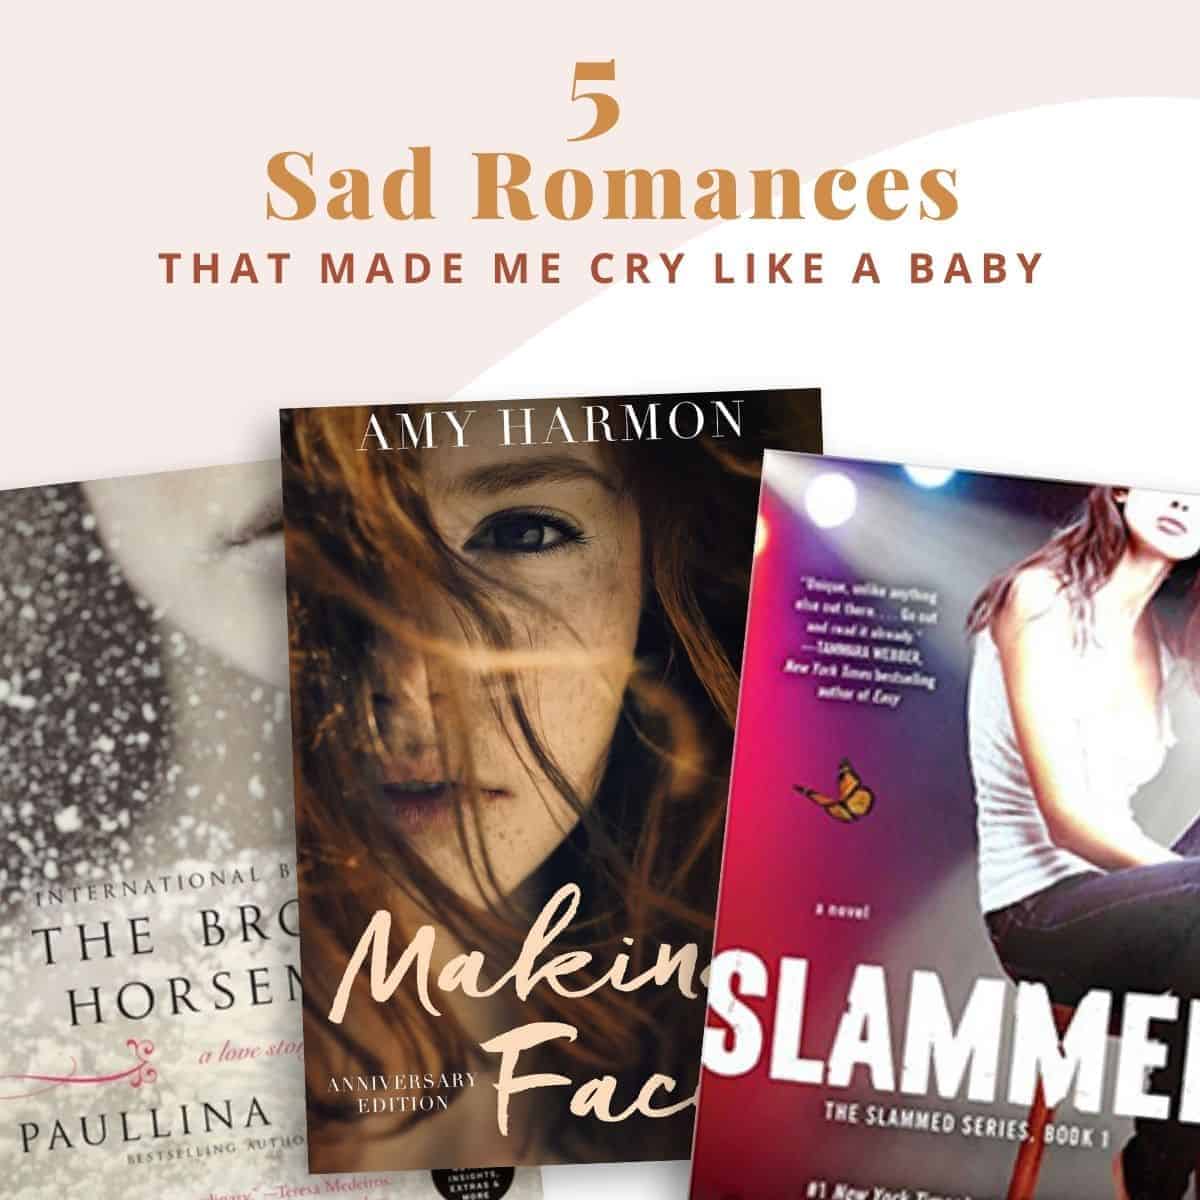 Grab a box of tissues, a bottle of wine, and some chocolates because this list of my all-time favorite sad romance books made me cry like a baby—I know you will, too!